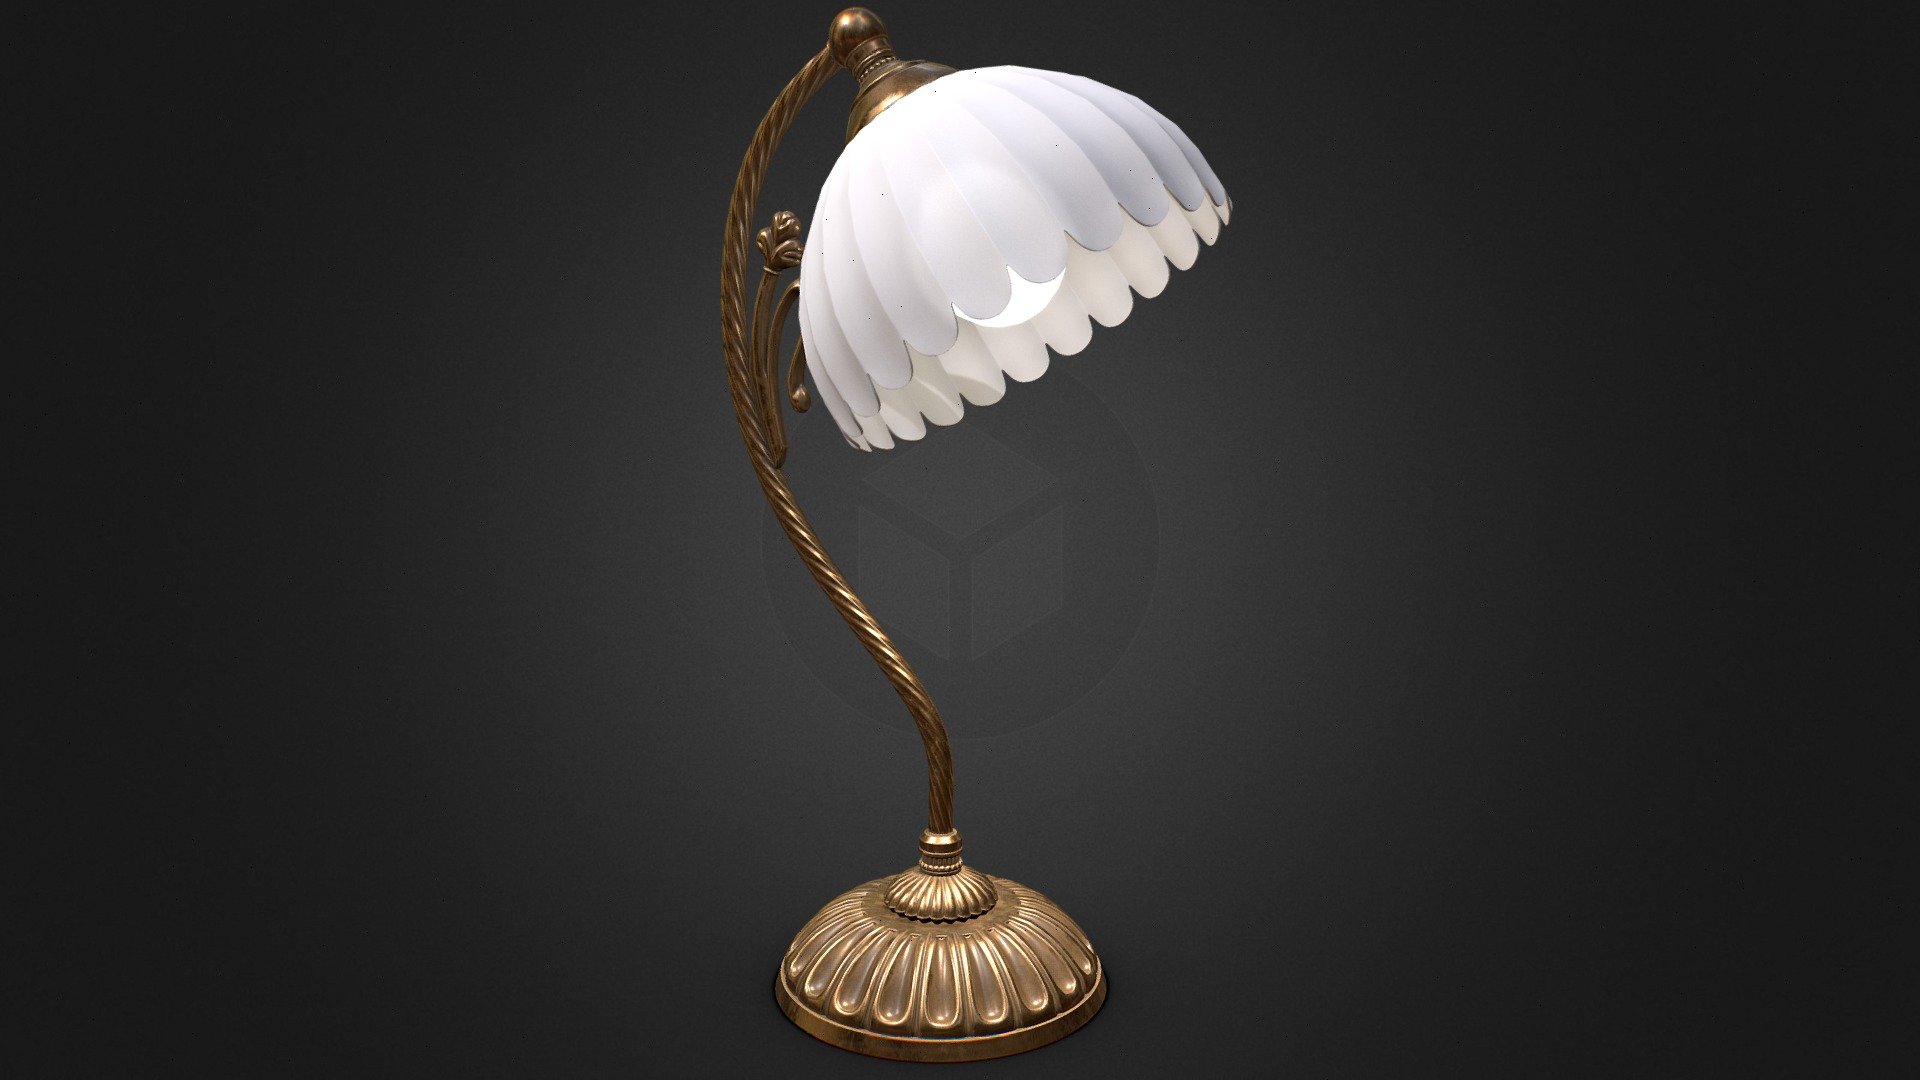 Classic table lamp.
Made in Maya and Zbrush. Textured in substance painter.
4096x4096 textures 3d model